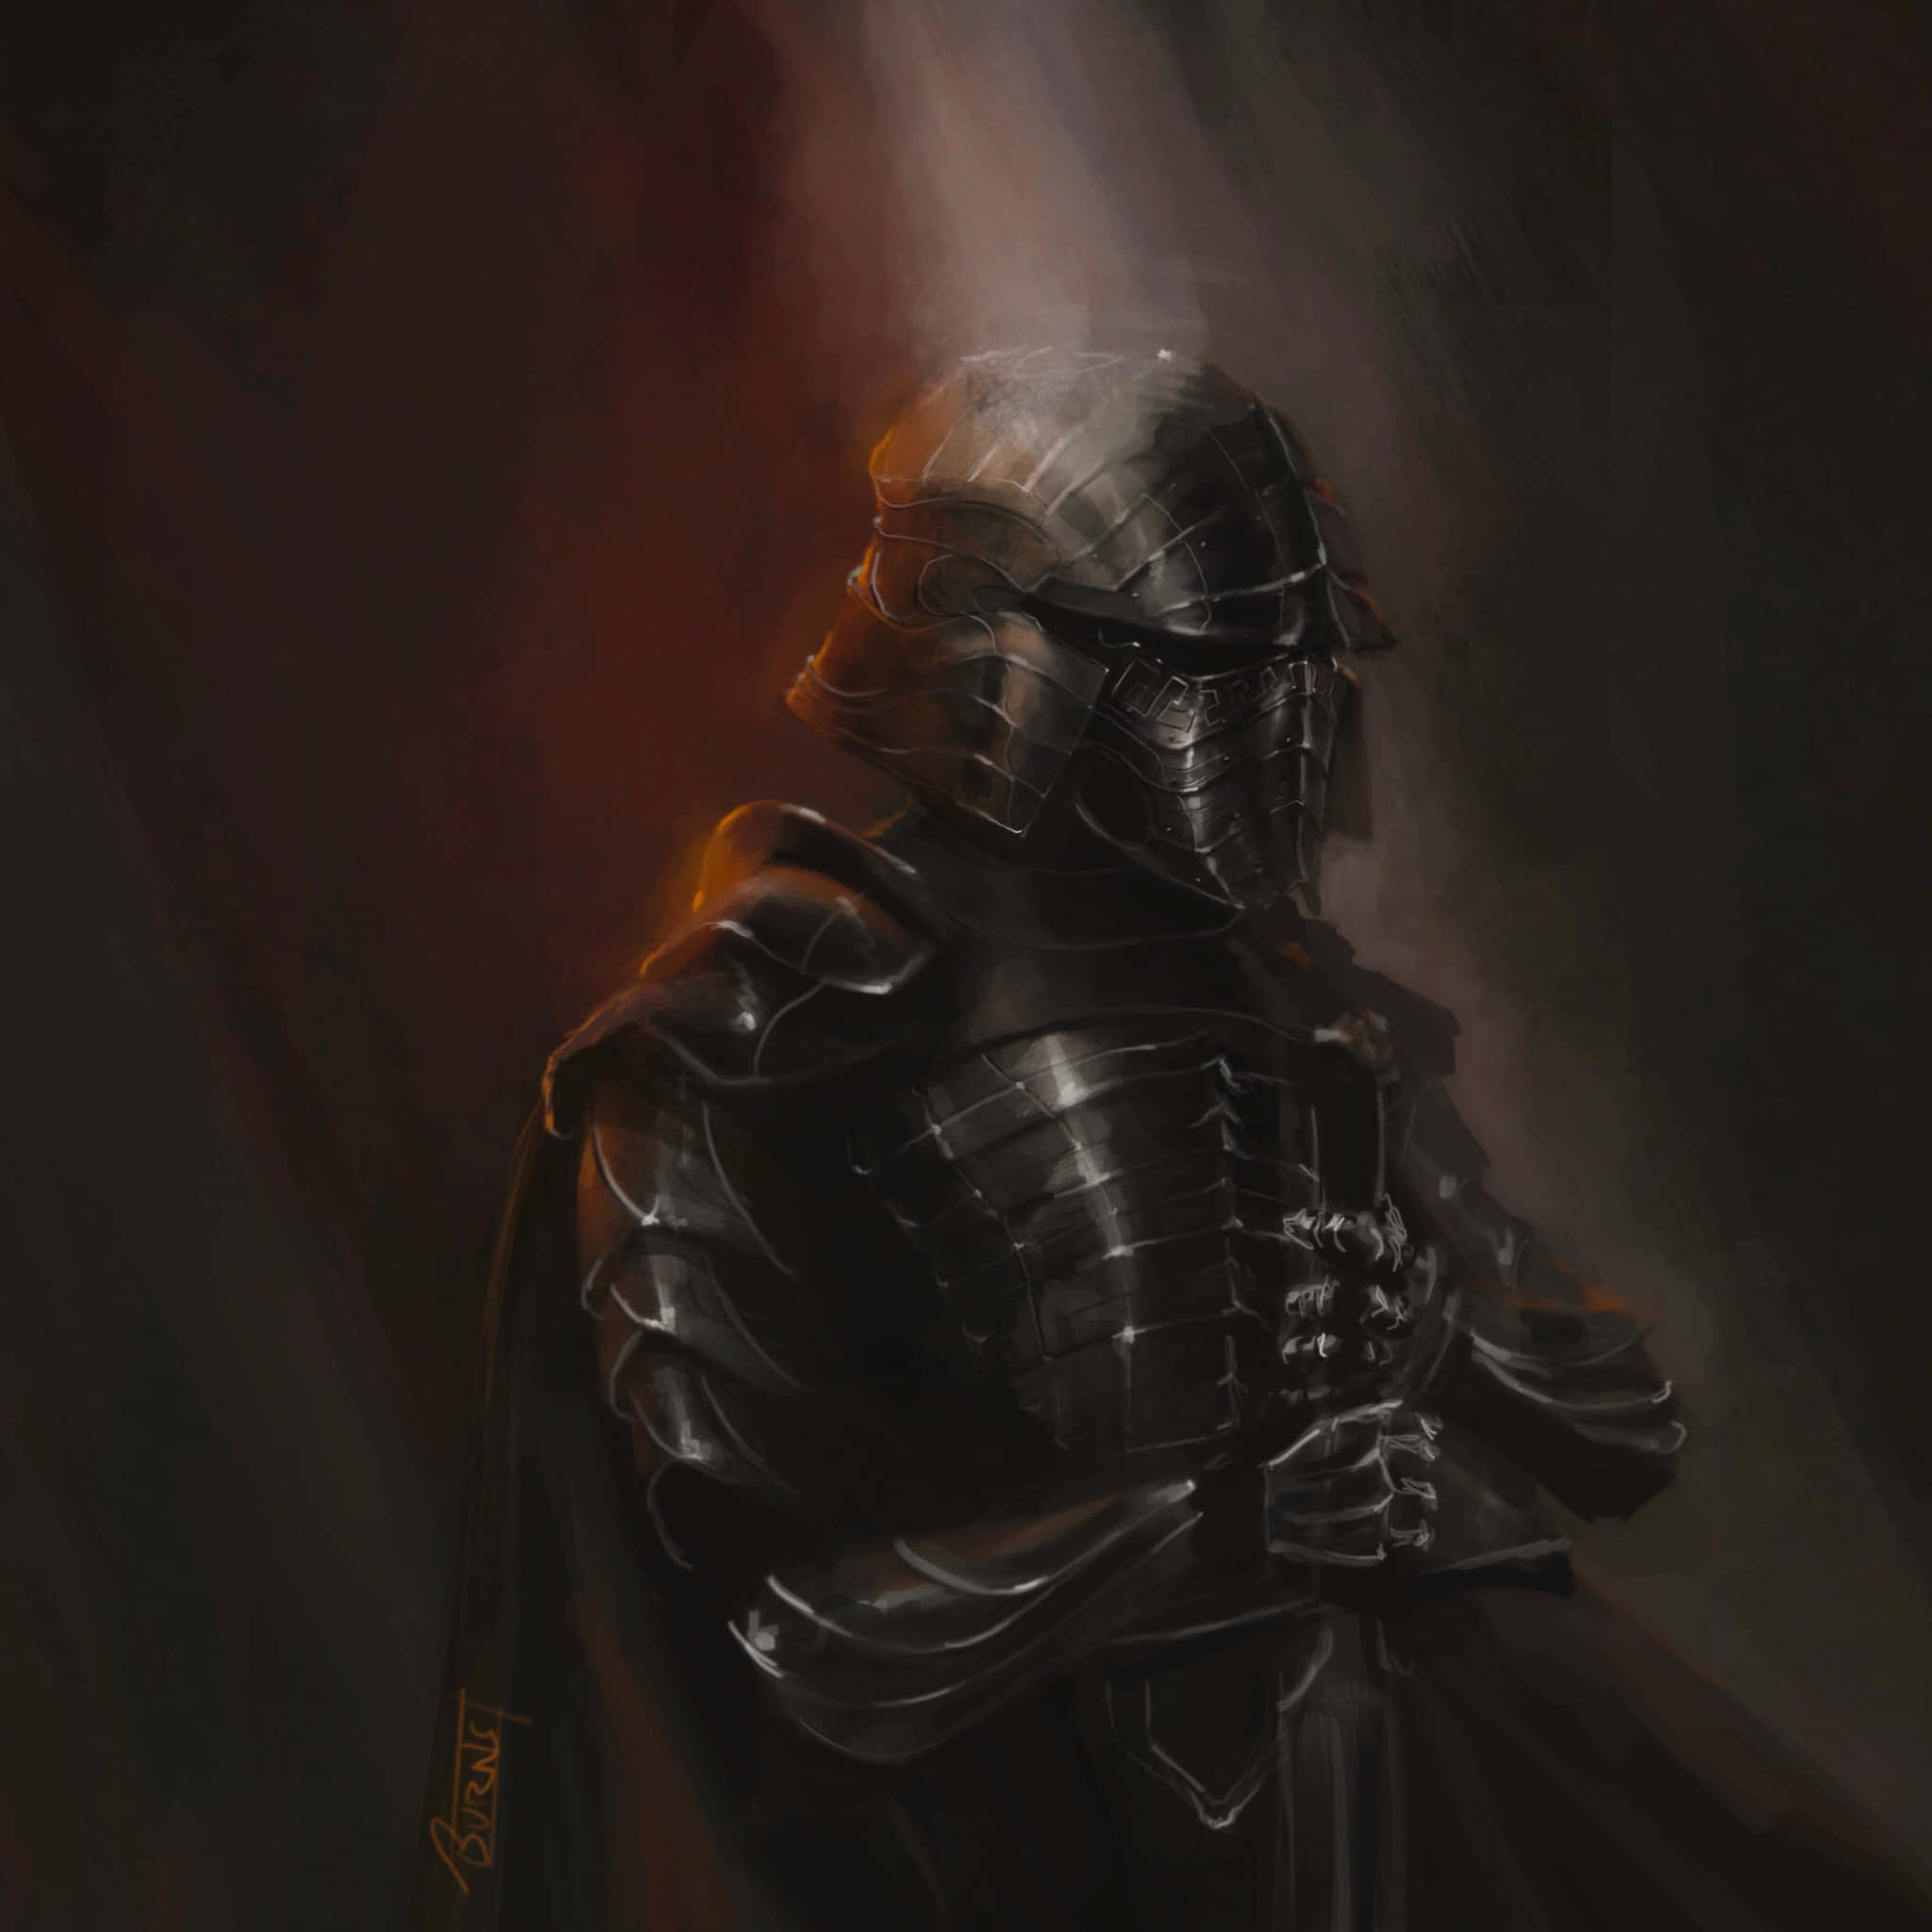 The Black Knight emerges from the shadows against a full moon' Wallpaper